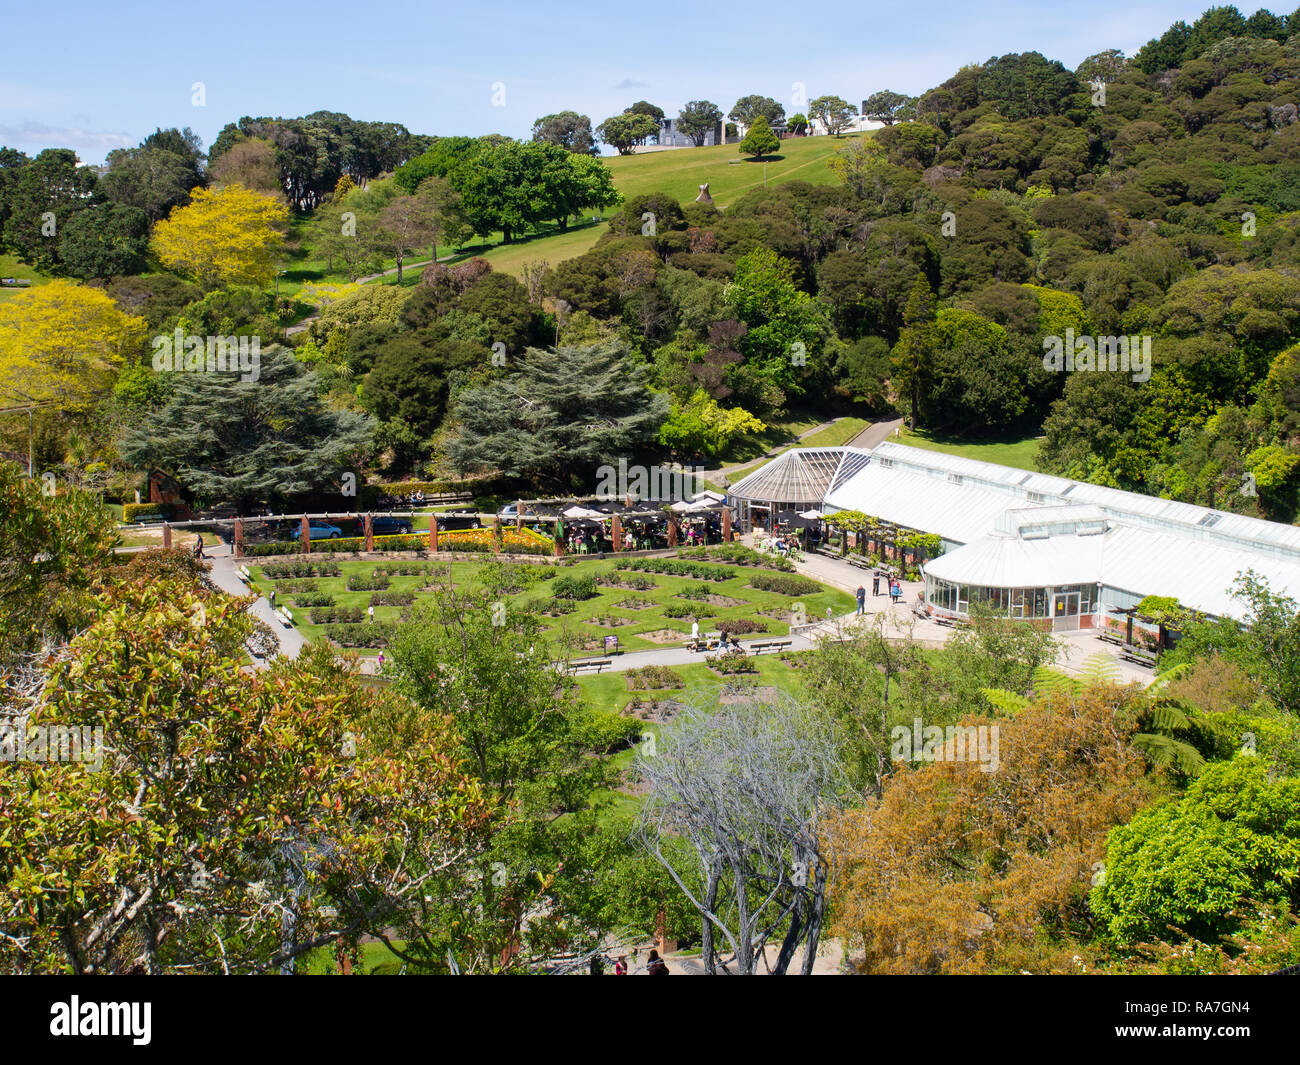 Elevated View Of The Lady Norwood Rose Garden At The Wellington Botanic Gardens Stock Photo